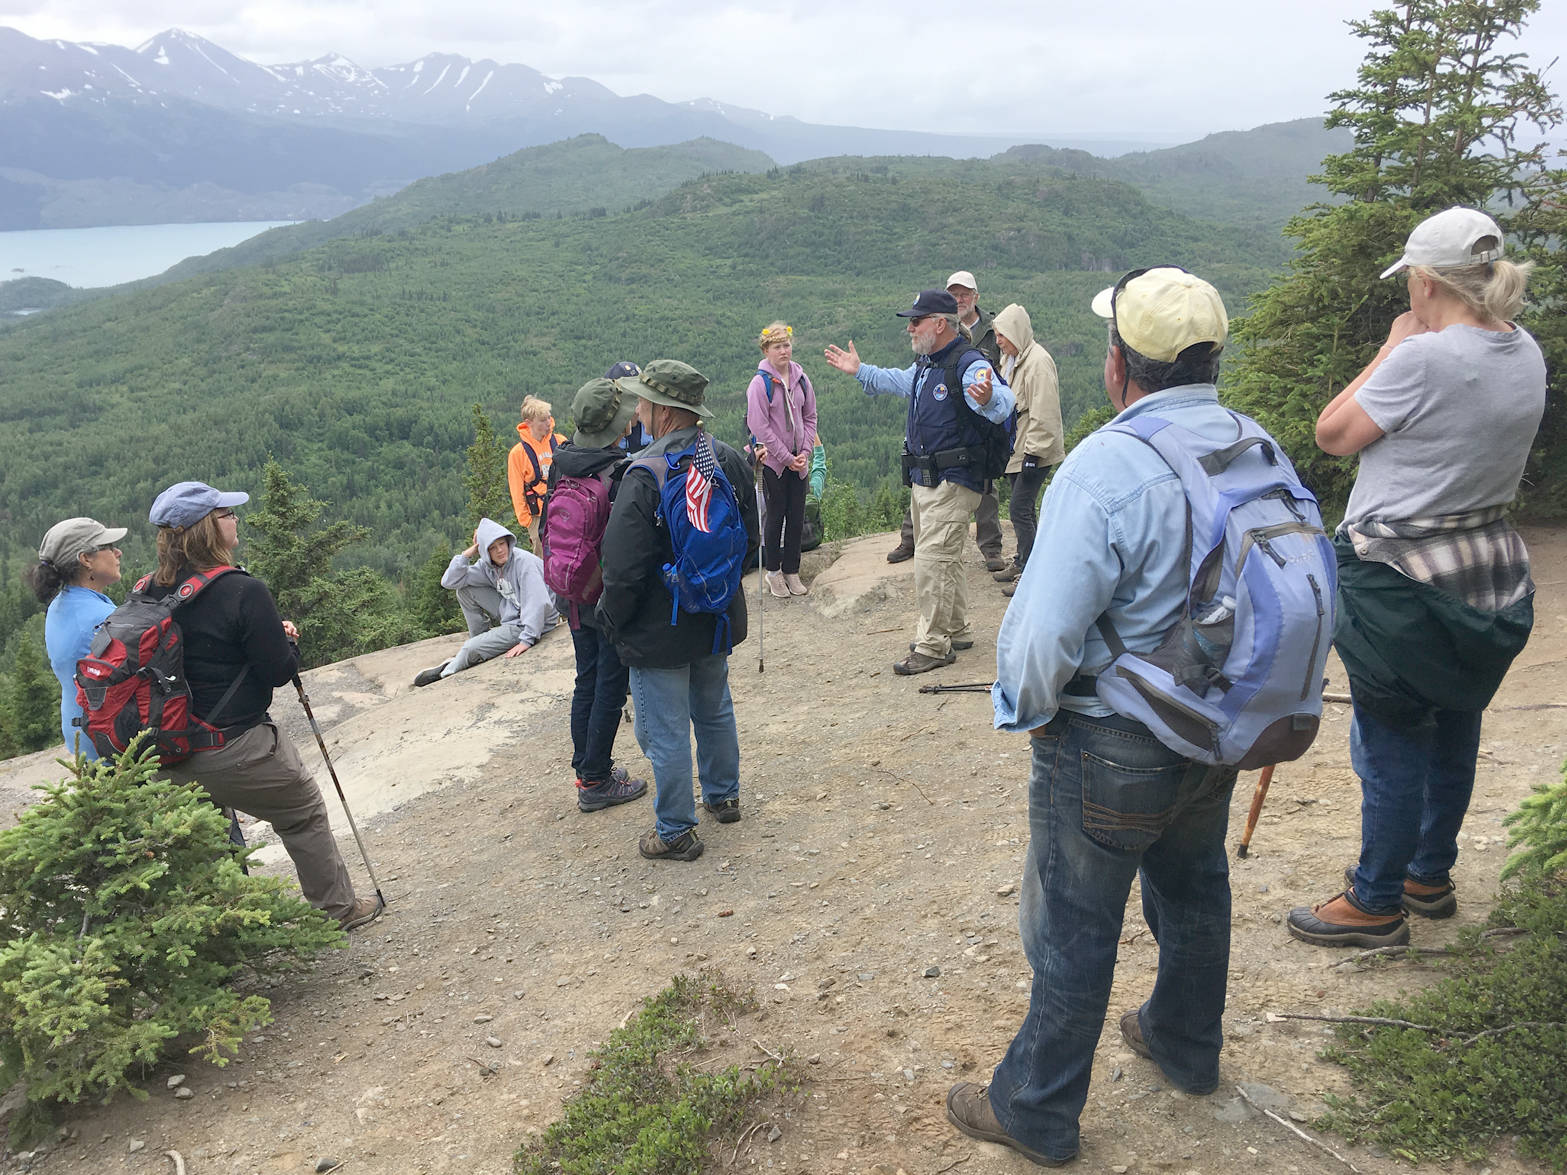 Bill Farrell, a volunteer host at the Kenai National Wildlife Refuge Visitors Center, tells a group about the refuge’s history during Take a Hike at the top of the Bear Mountain trail Friday, June 29, 2018. (Photo by Jeff Helminiak/Peninsula Clarion)